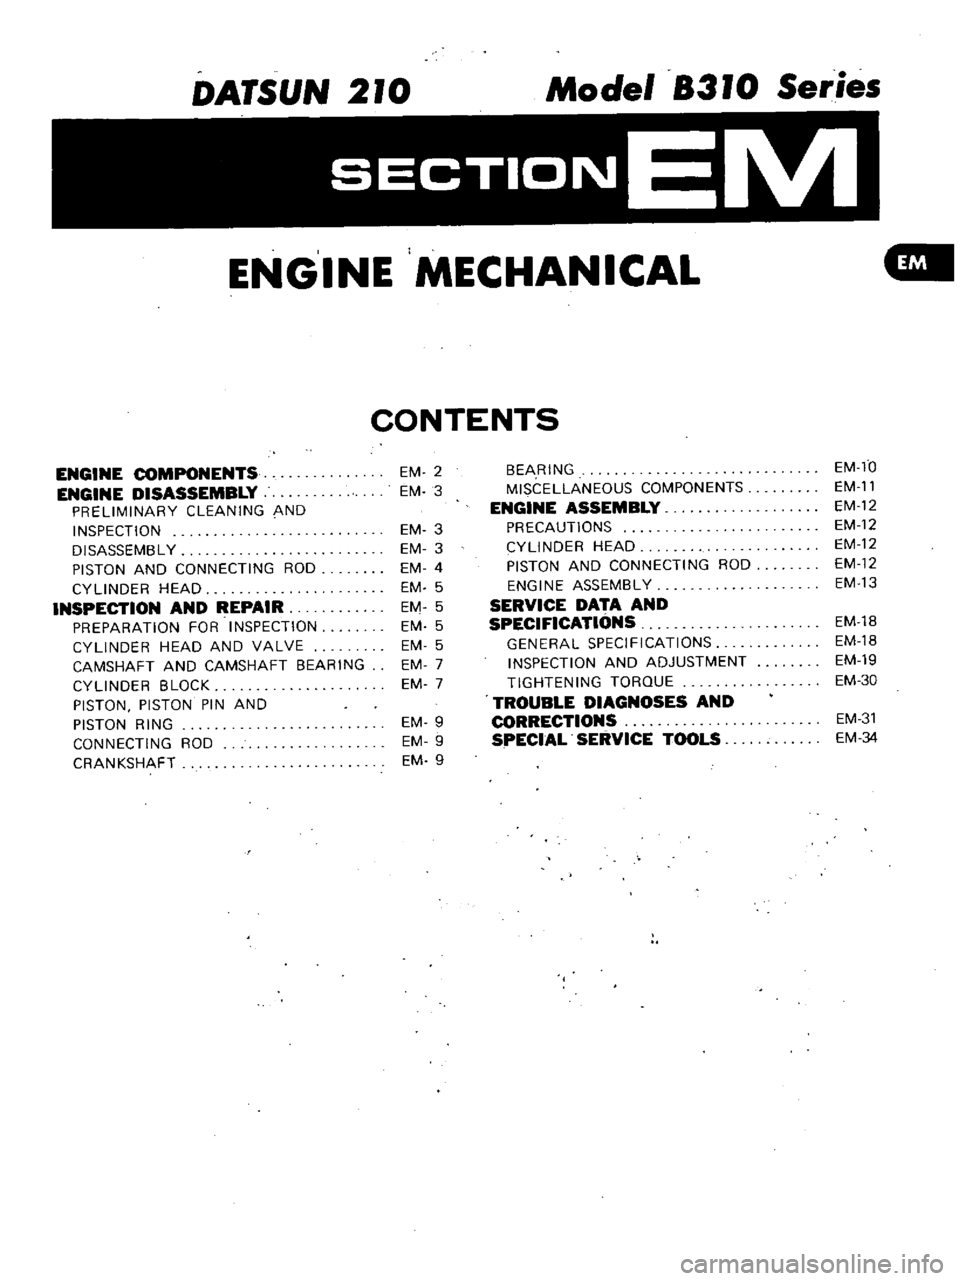 DATSUN 210 1979 Owners Guide 
DATSUN 
210 
Model 
8310 
Series

ENGINE 
MECHANICAL 
GIll

CONTENTS

ENGINE 
COMPONENTS

ENGINE 
DISASSEMBLY

PRELIMINARY 
CLEANING 
AND

INSPECTION

DISASSEMBL 
Y

PISTON 
AND

CONNECTING 
ROD

CYL